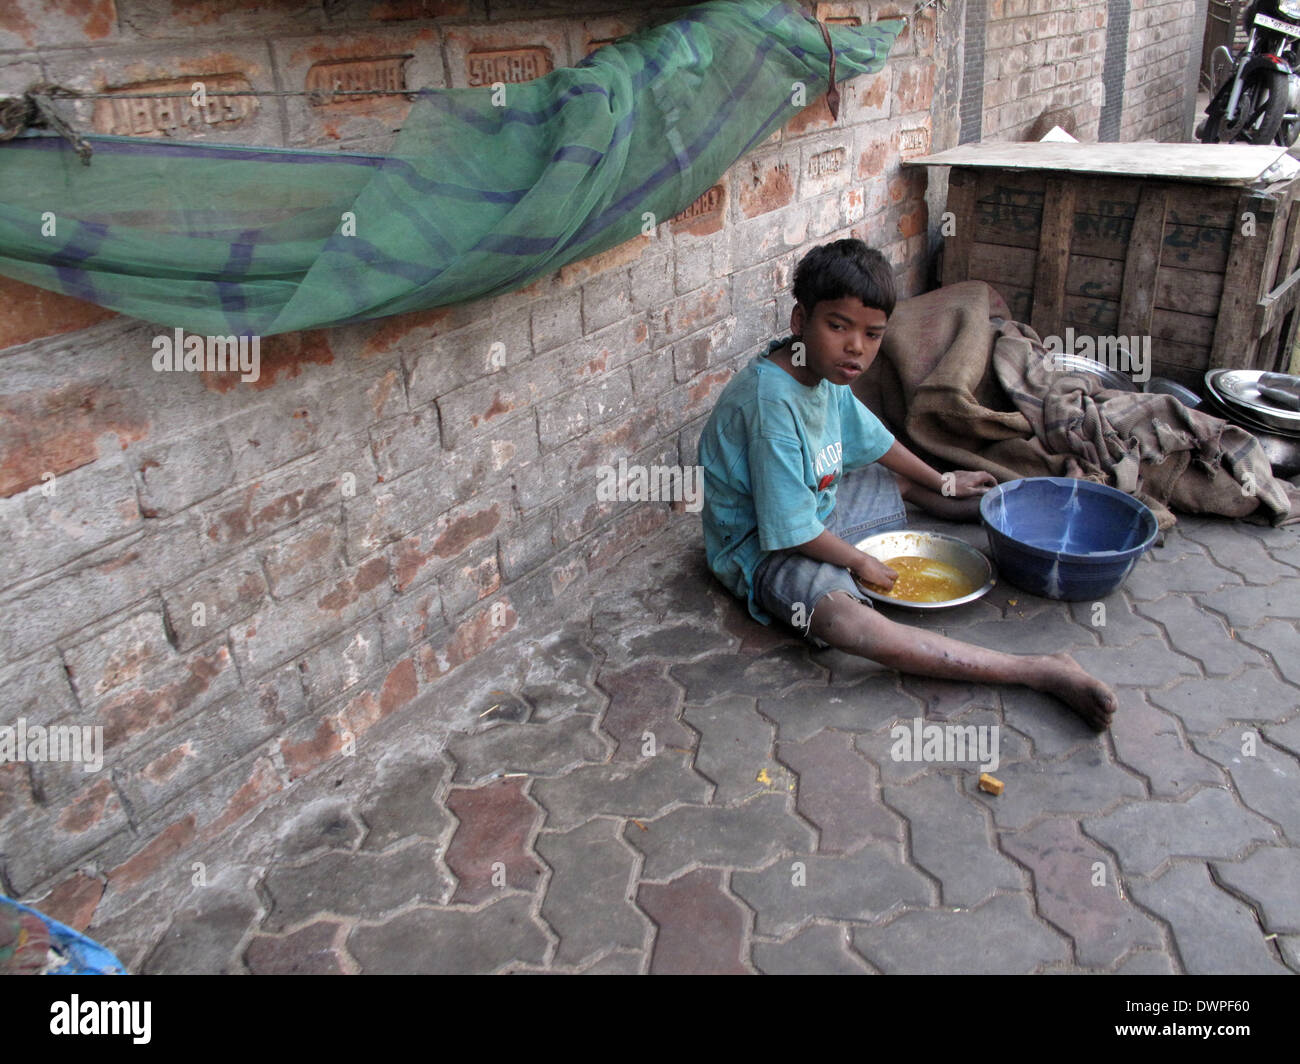 Streets of Kolkata. People live and work on the streets, January 30, 2009. Stock Photo